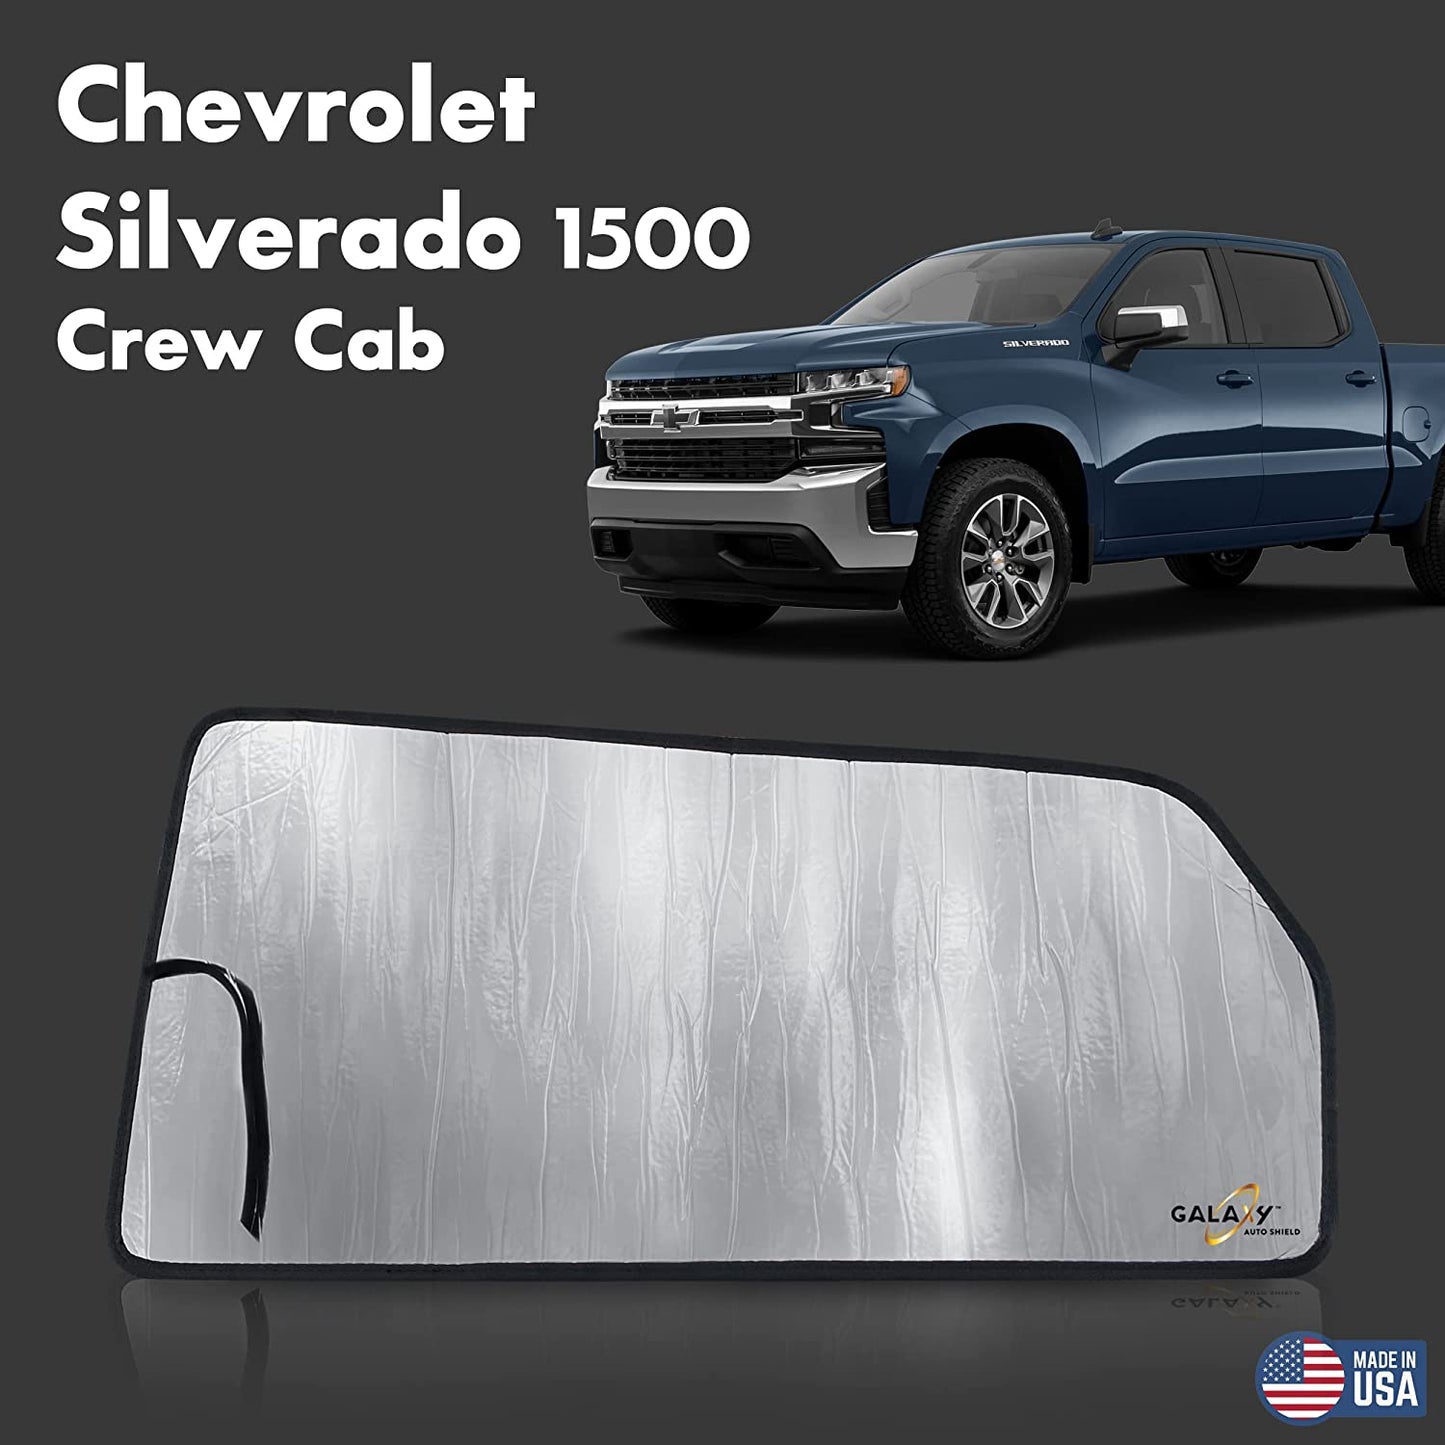 Custom Fit Windshield Sun Shade for 2019 2020 2021 2022 Chevrolet Silverado 1500 2500 3500, 2Dr 4Dr, Insulated Window Sunshade Privacy Accessories Blockout UV Reflector Protection - Made in USA